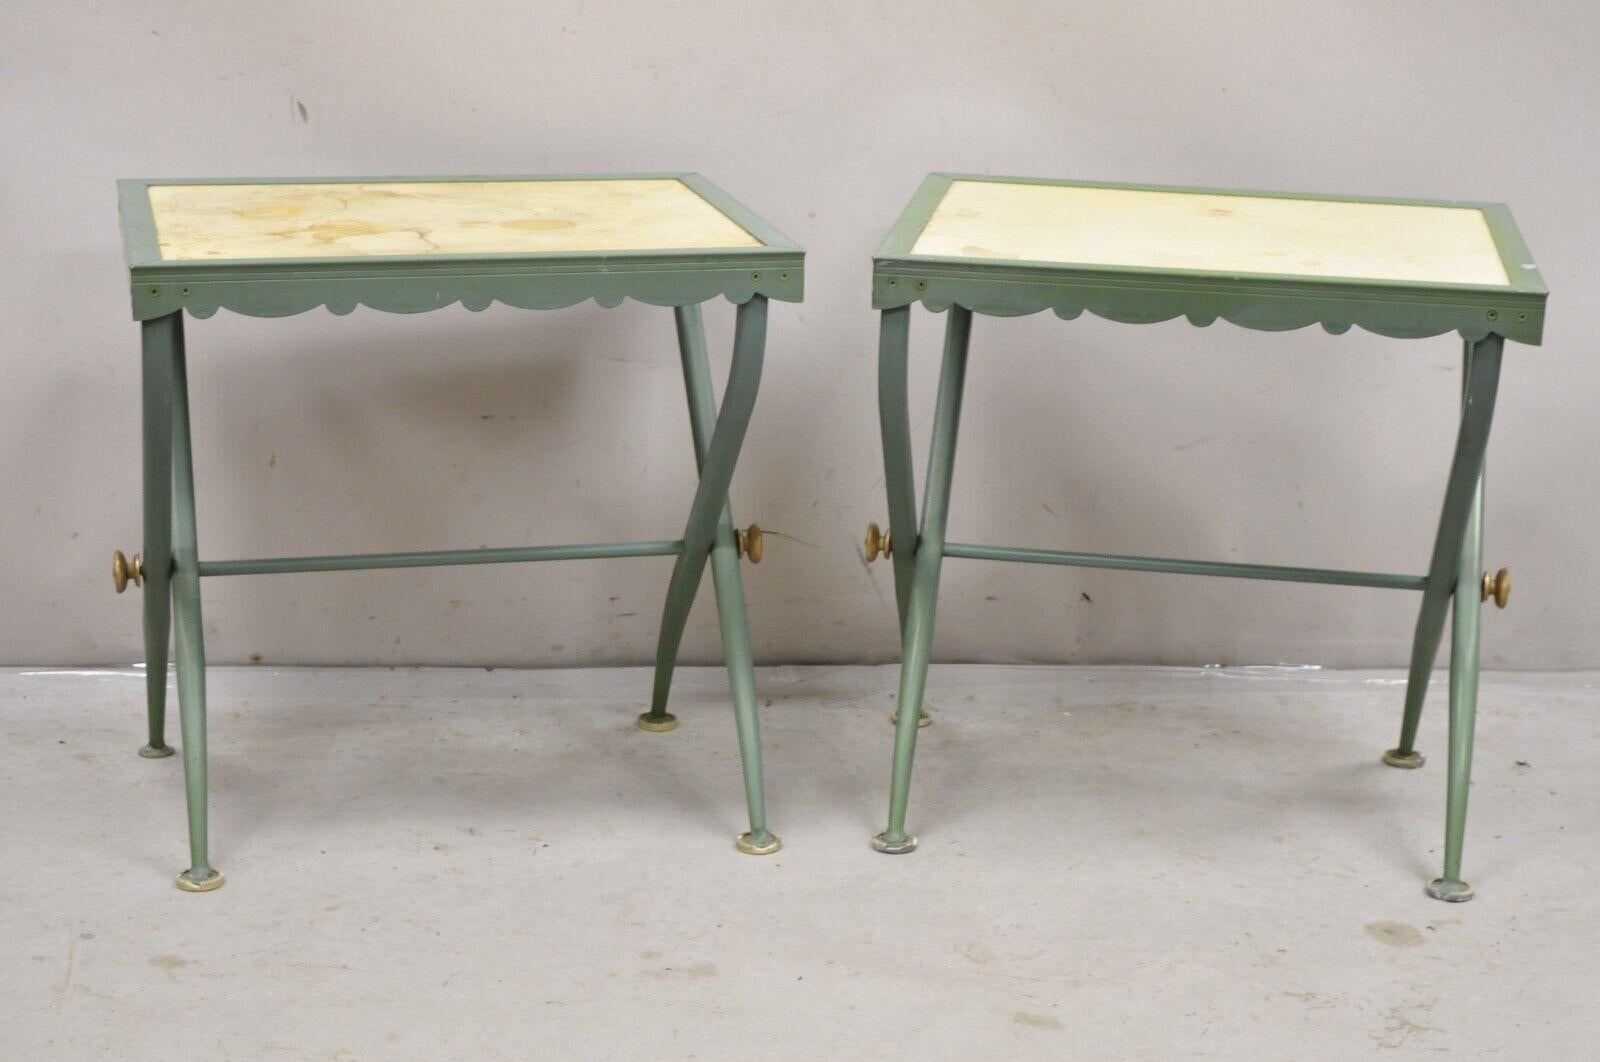 Vintage Troy Sunshade Hollywood Regency Green Curule X-Frame Aluminum Outdoor Pool Side Tables - Pair. Item features  Fiberglass tops, aluminum frames, original label, great style and form. Circa 1960s. Measurements: 20